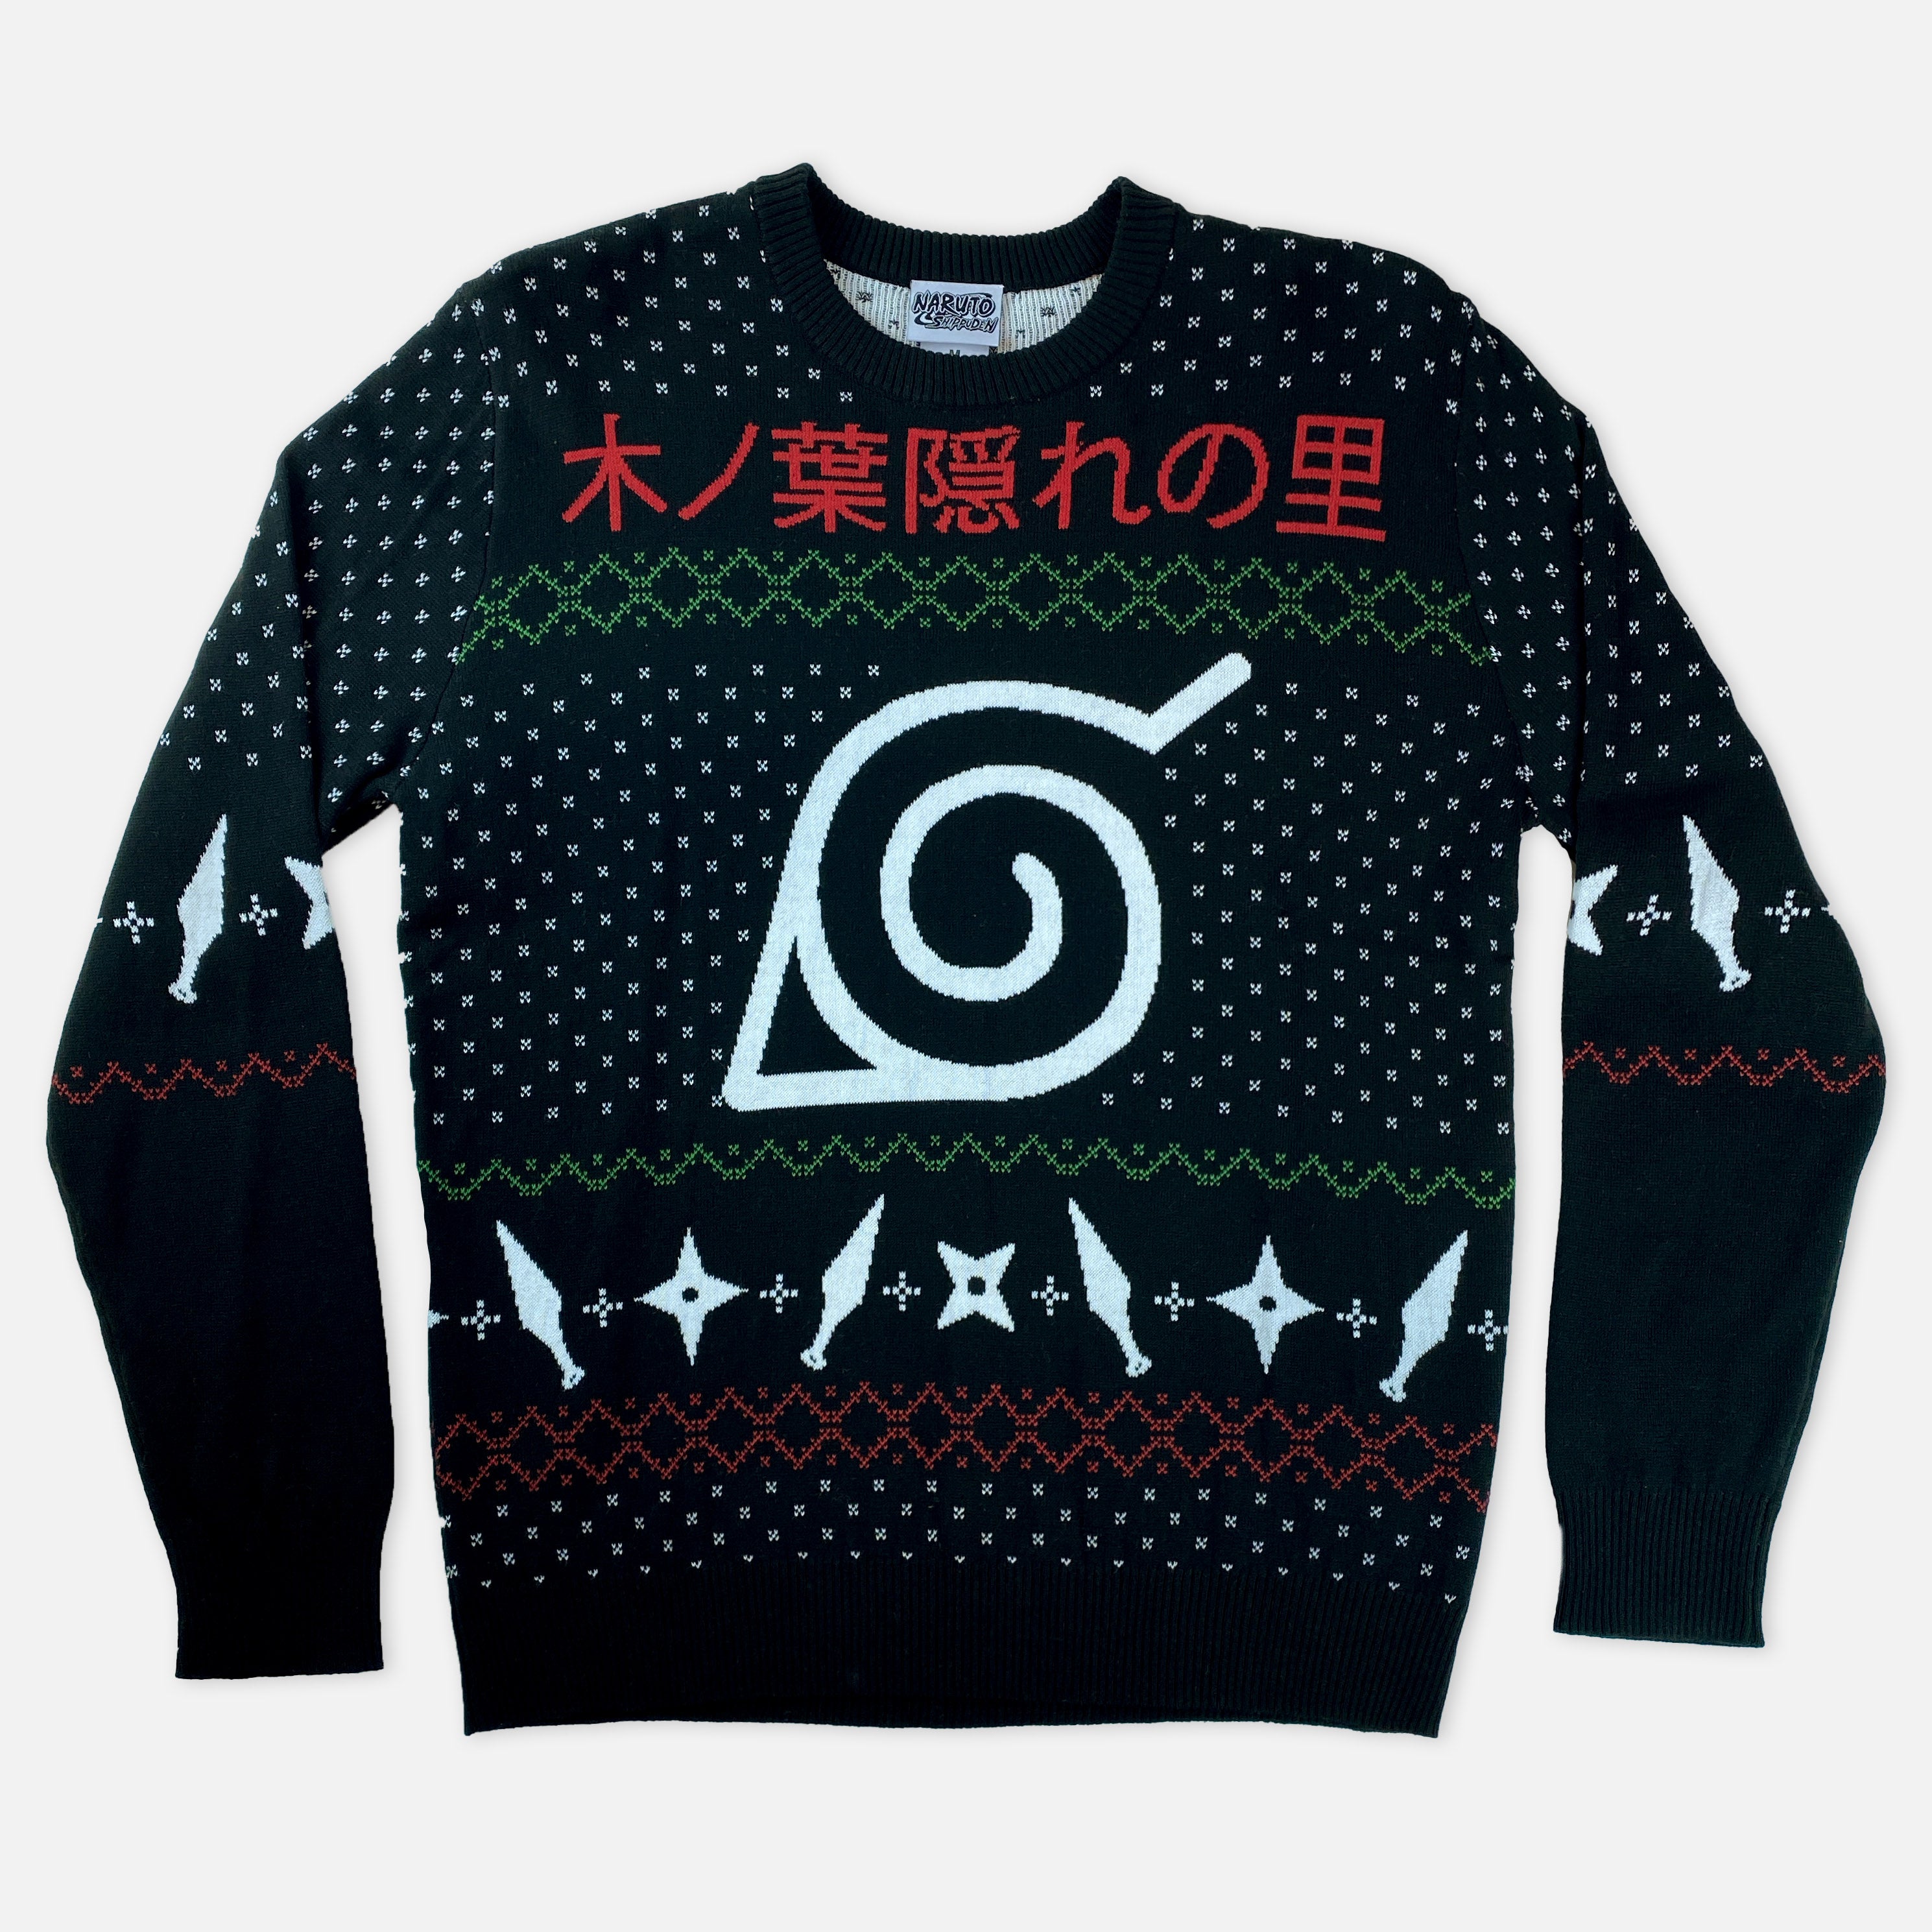 Naruto Shippuden - Hidden Leaf Village Holiday Sweater image count 0